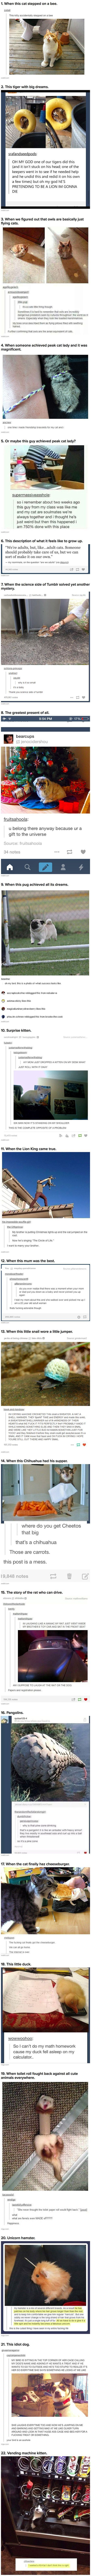 We have rounded up some funny and cute Tumblr posts that just might break the internet.